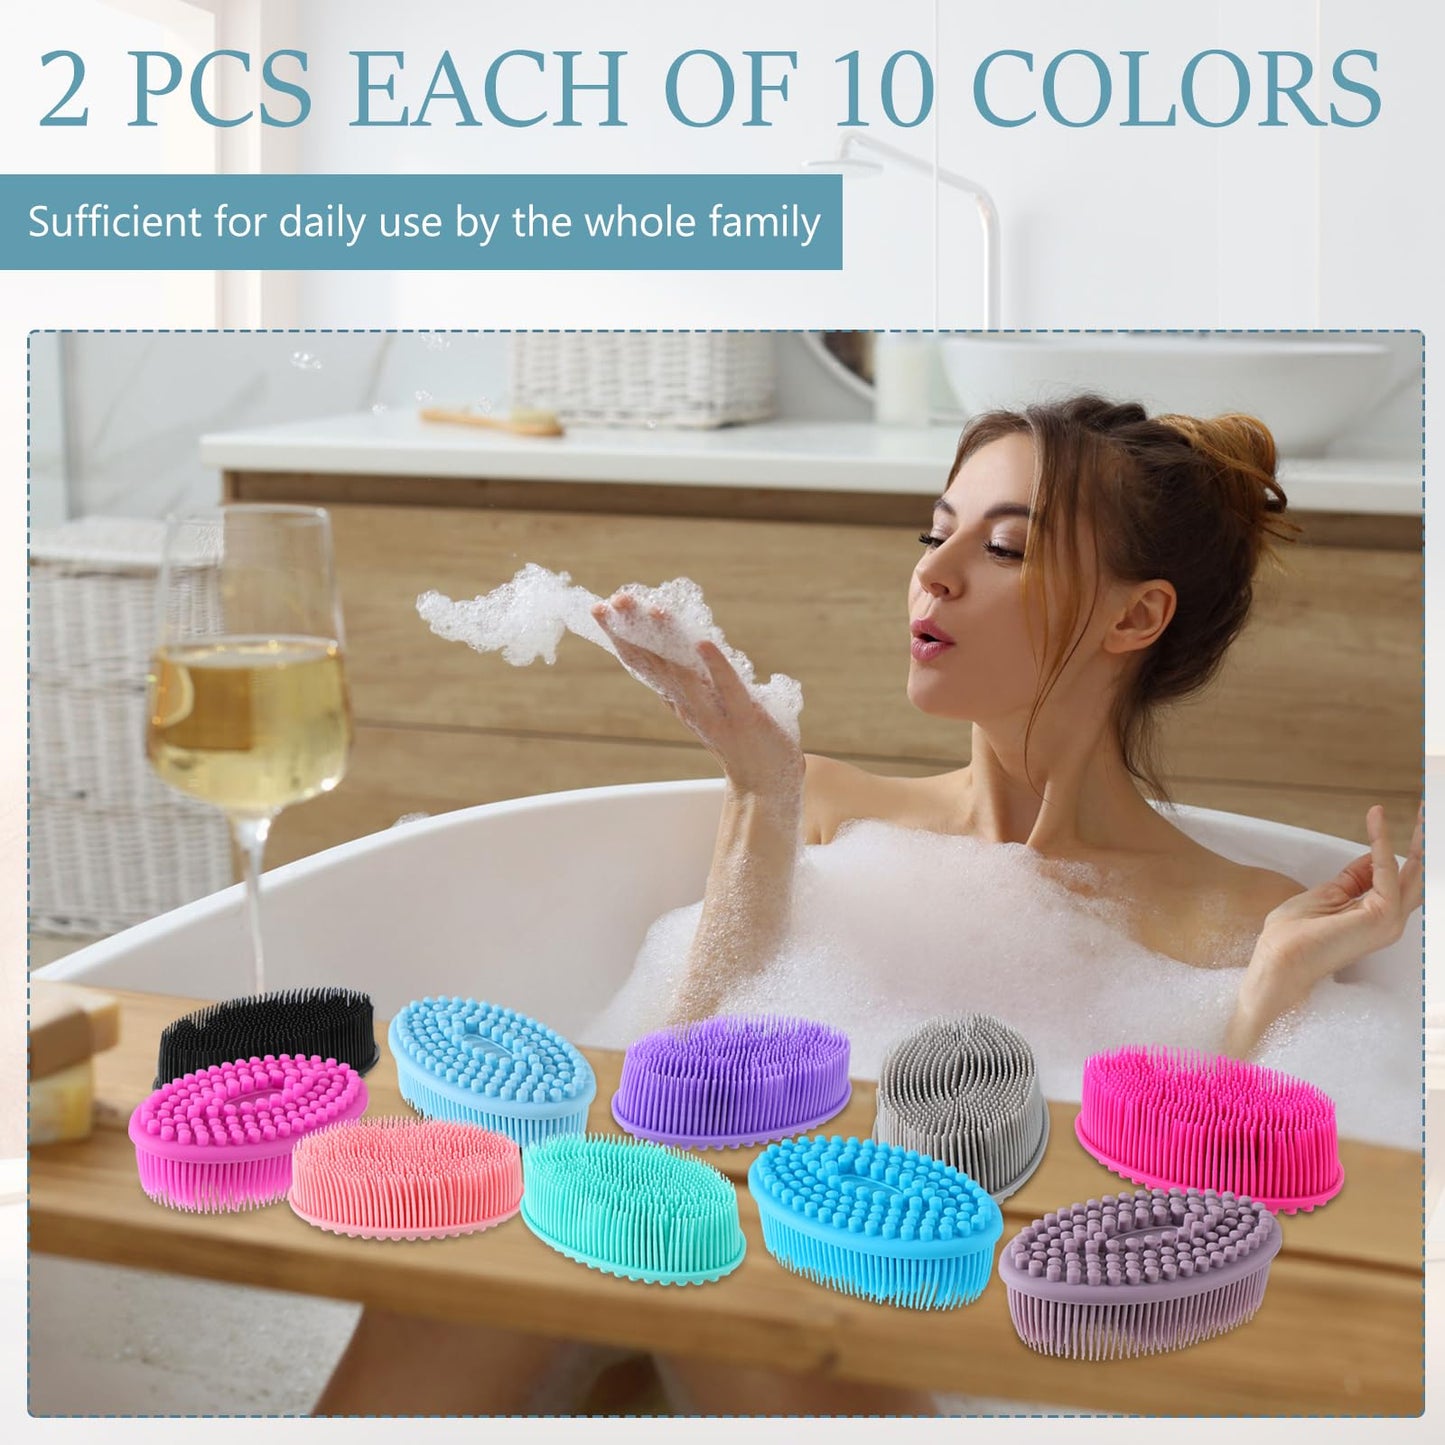 FoldTier 20 Pack Silicone Body Scrubber Soft Silicone Loofah Exfoliating Body Scrubber Double Sided Silicone Body Brush Shampoo Massager for Men Women Kid Skin Clean, 10 Colors